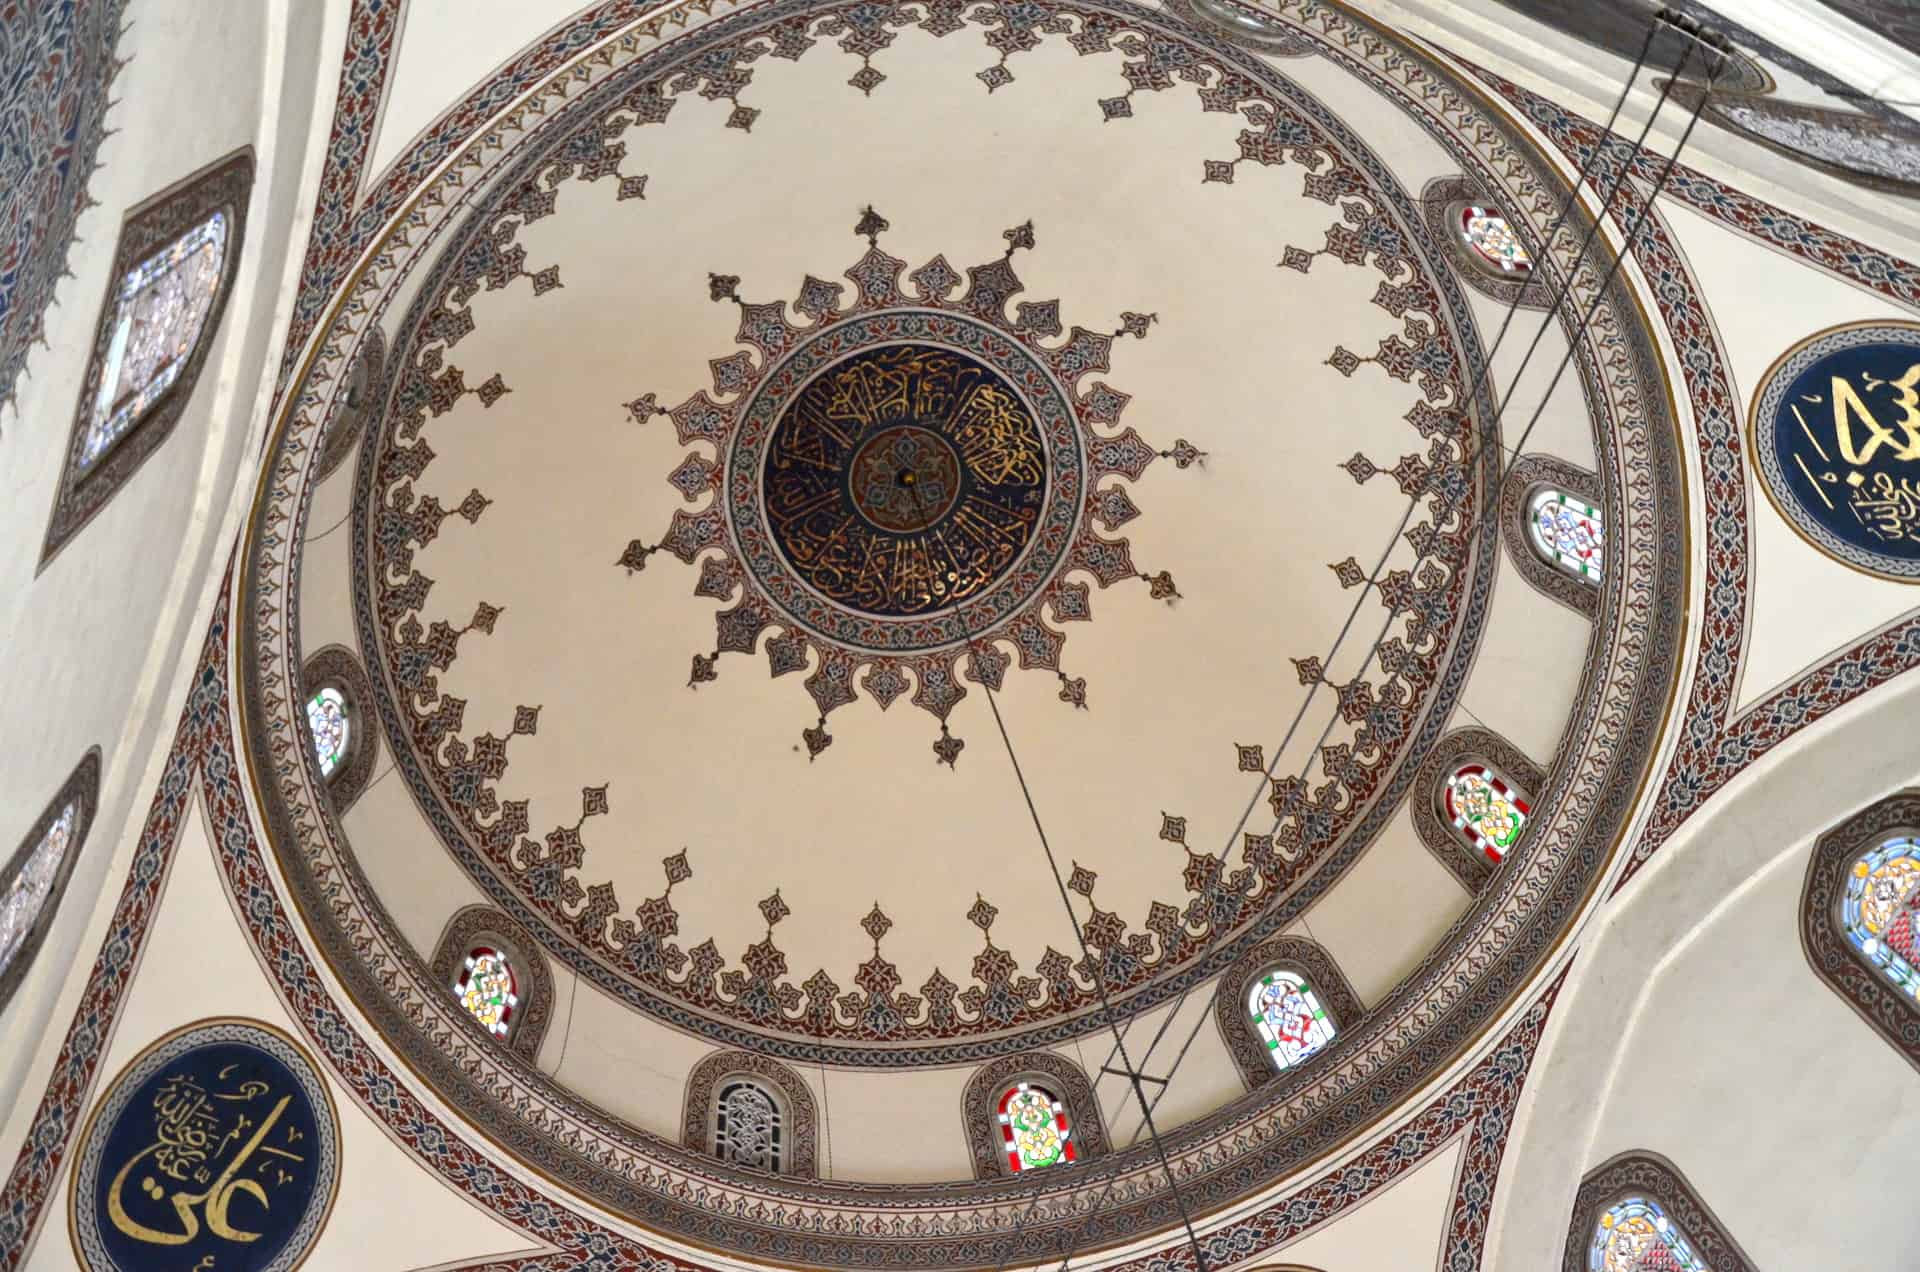 Dome of the Imaret Mosque in Afyon, Turkey